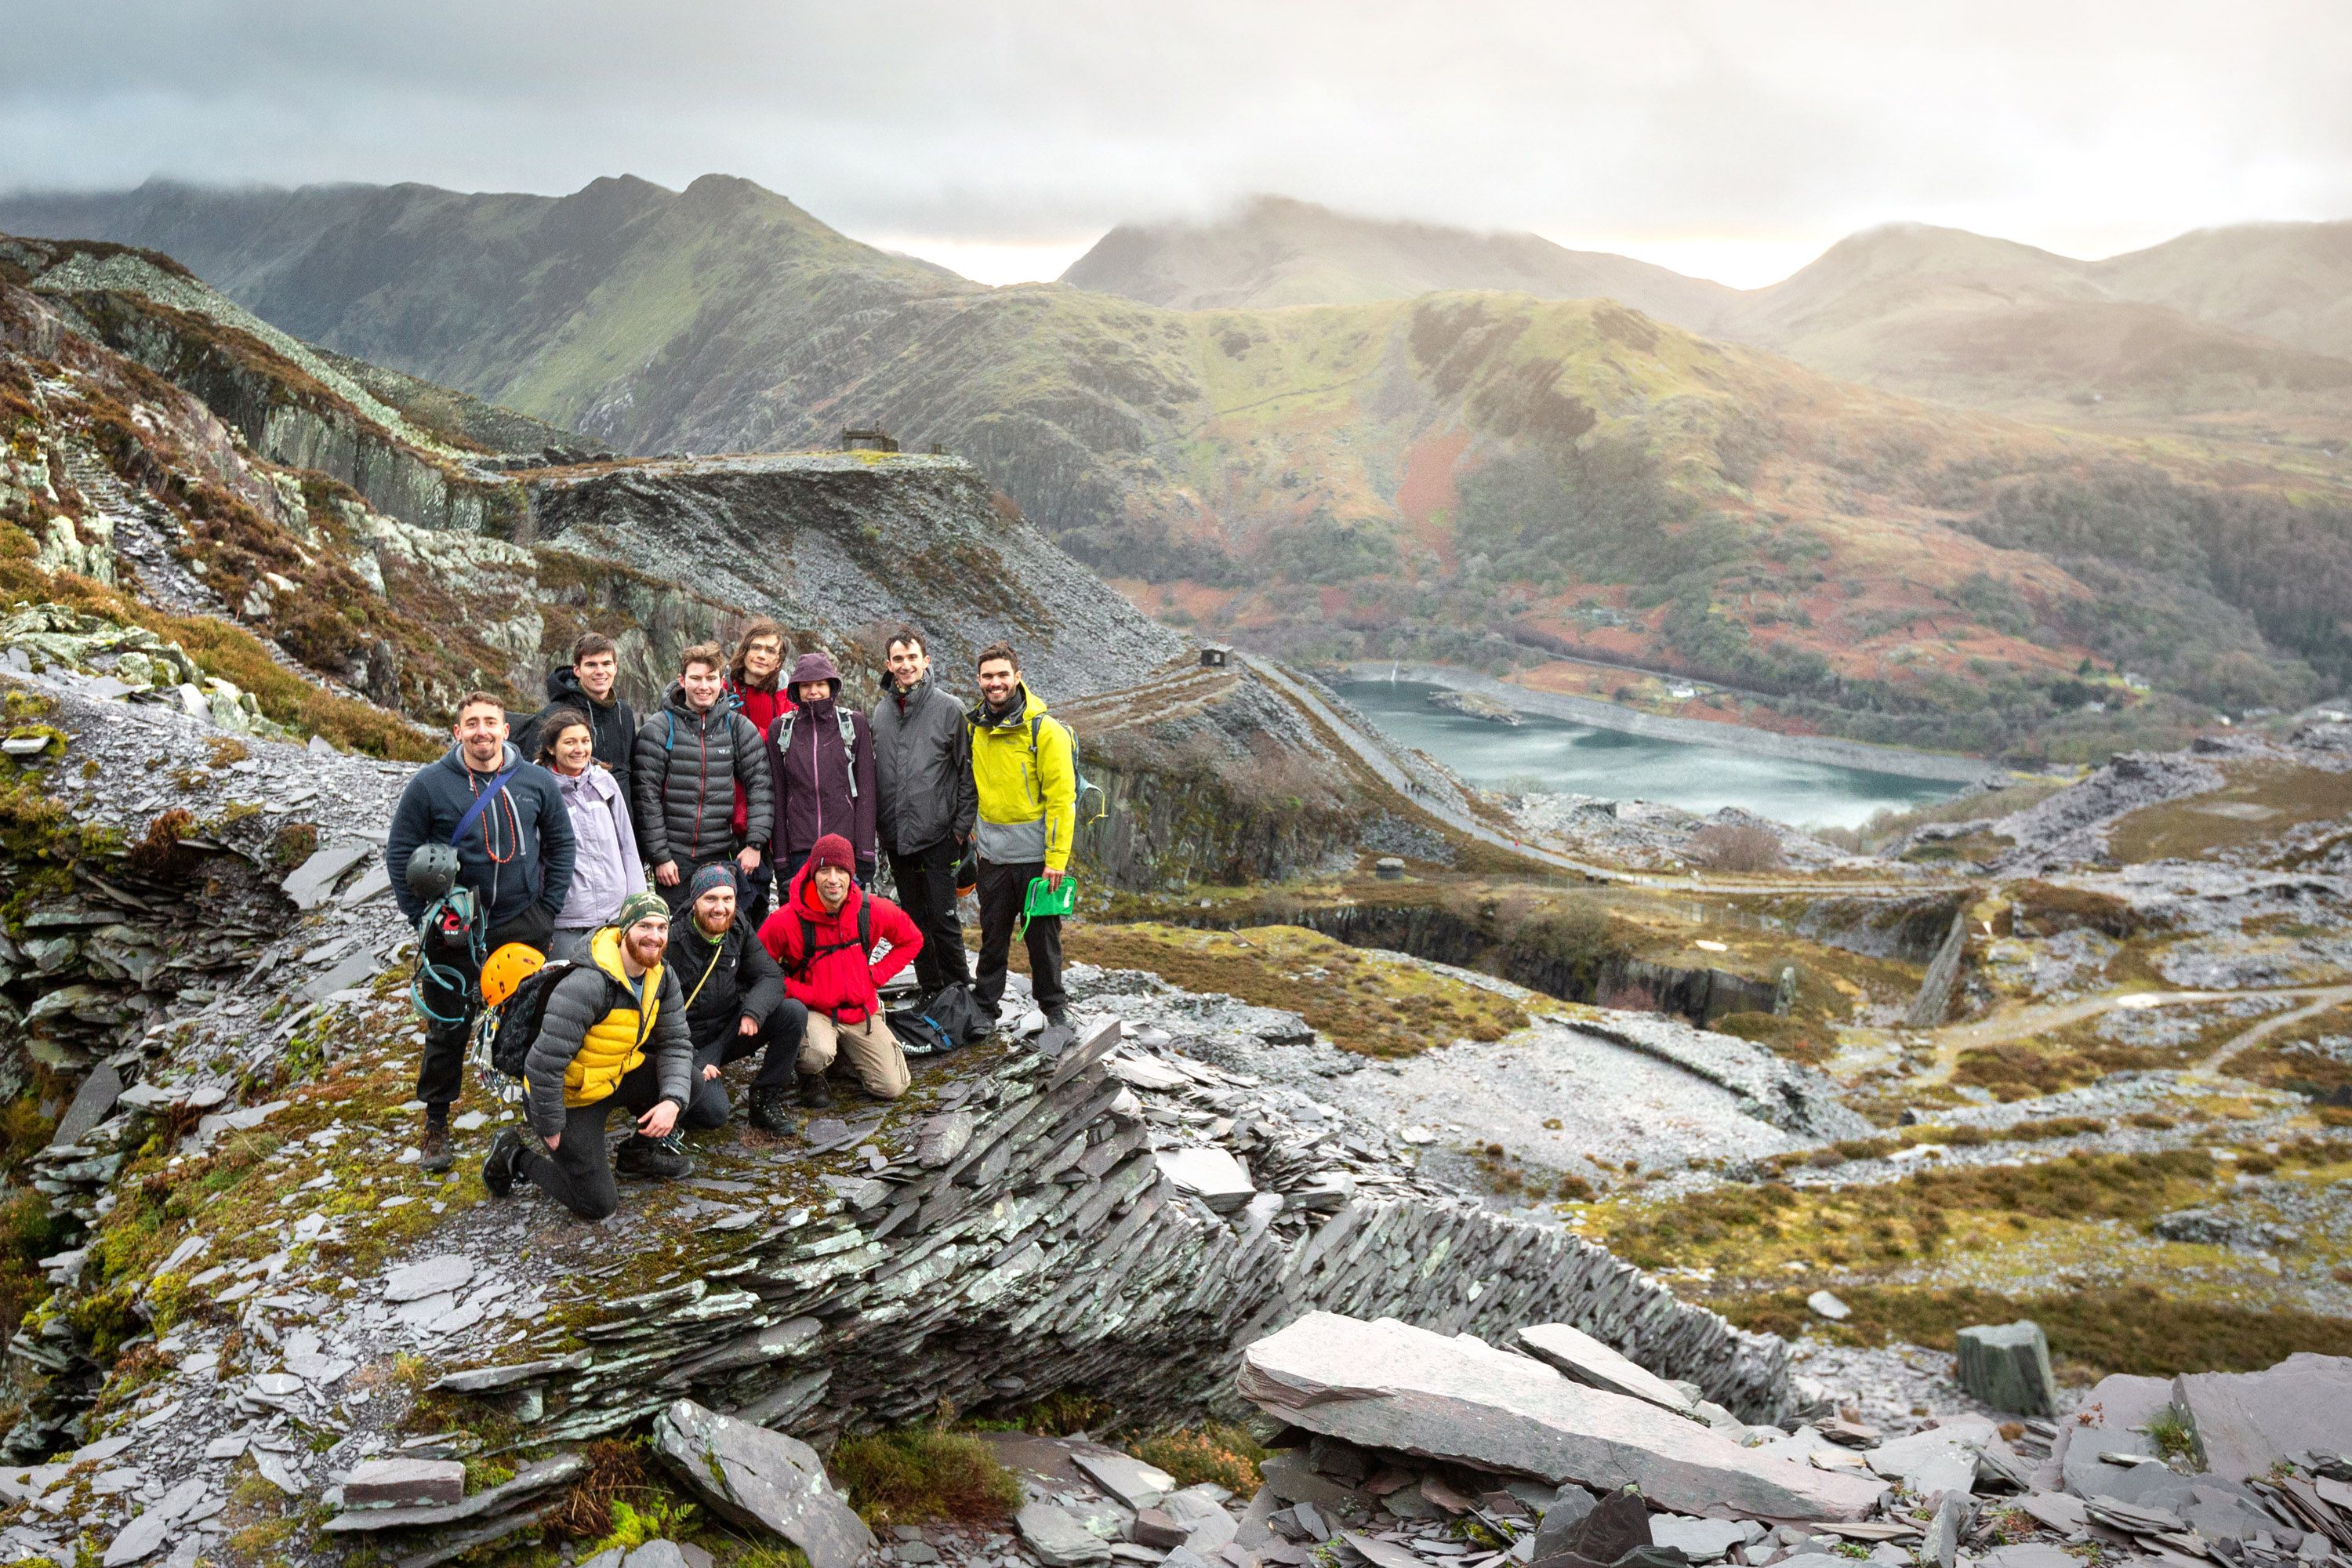 A group of students in weatherproof gear posing for the camera in front of a dramatic background of rocky hills and a lake